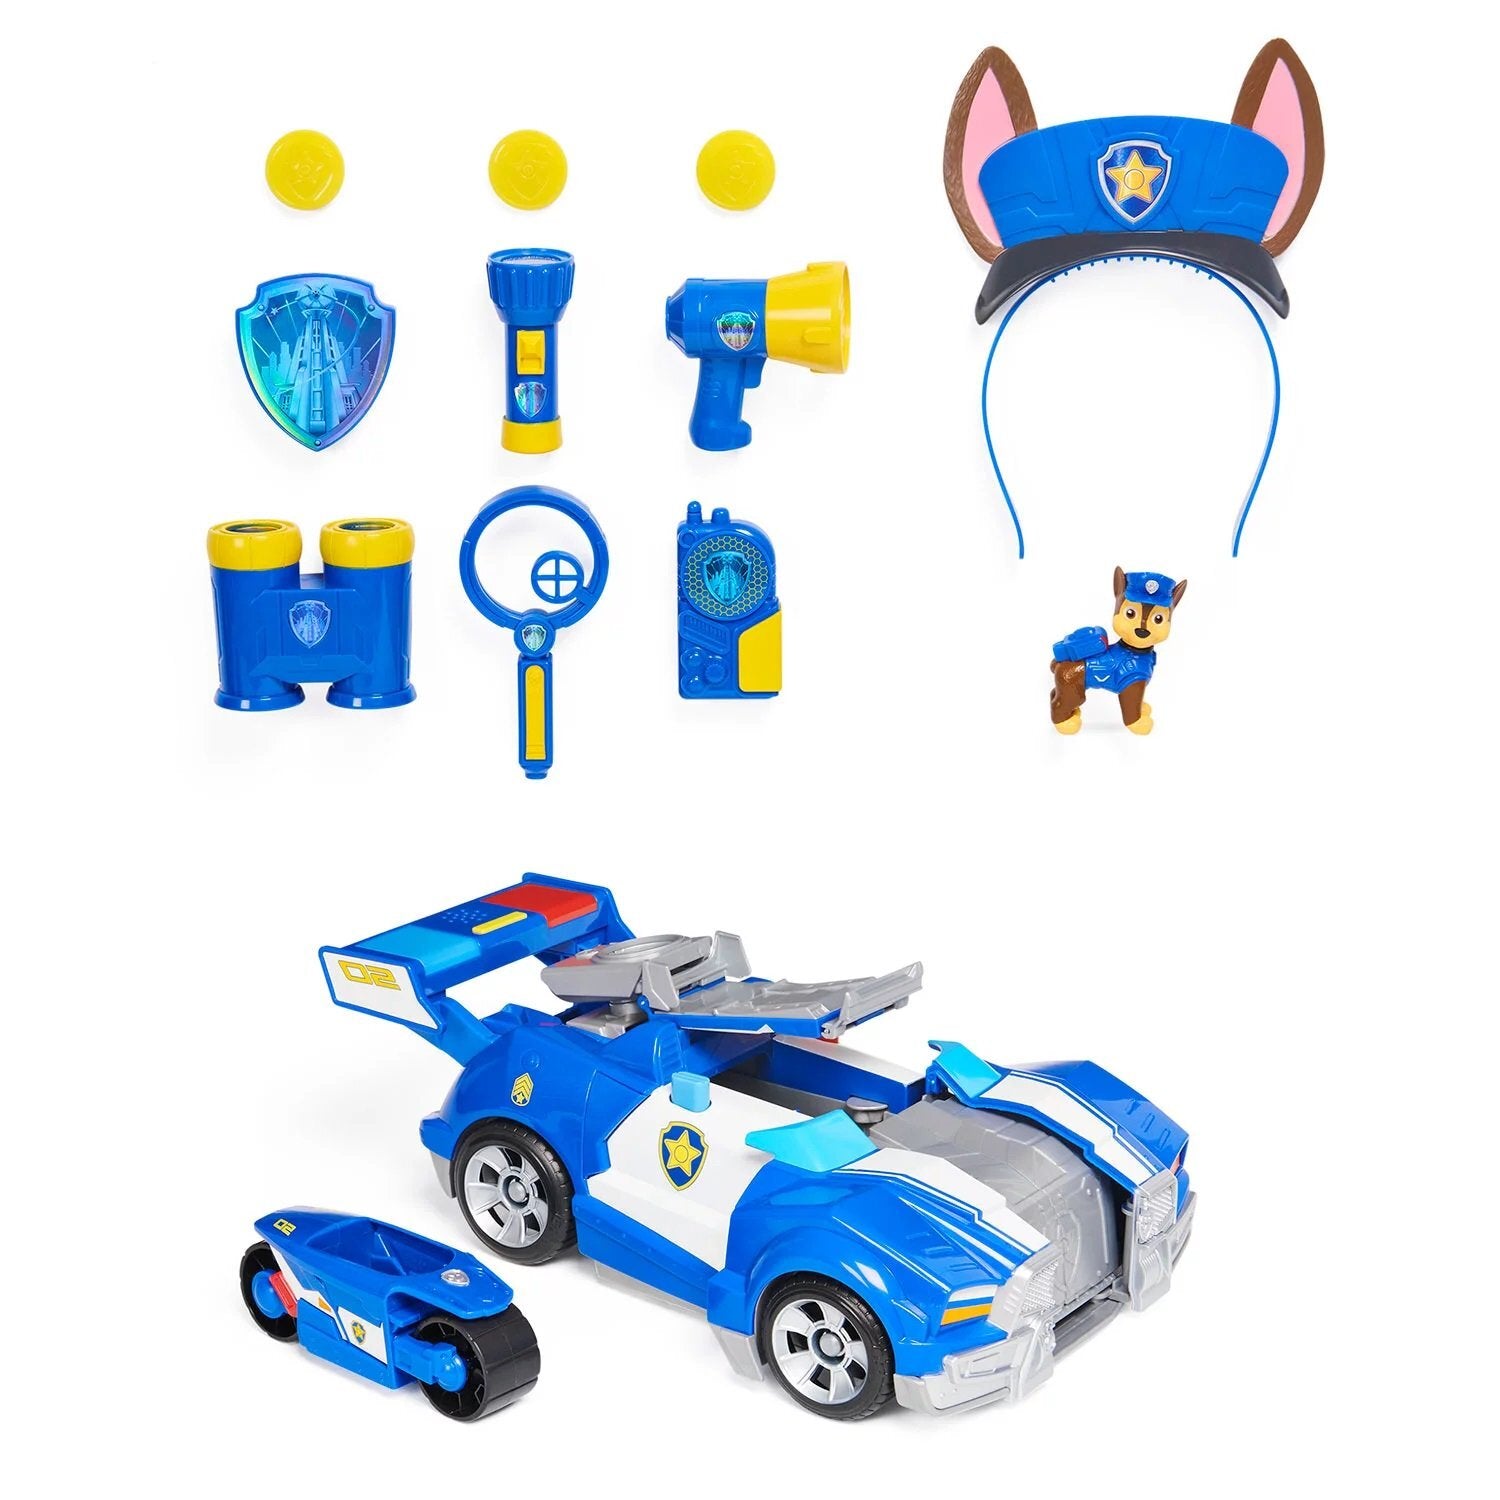 Paw Patrol The Movie Ultimate Chase Fan Gift Pack